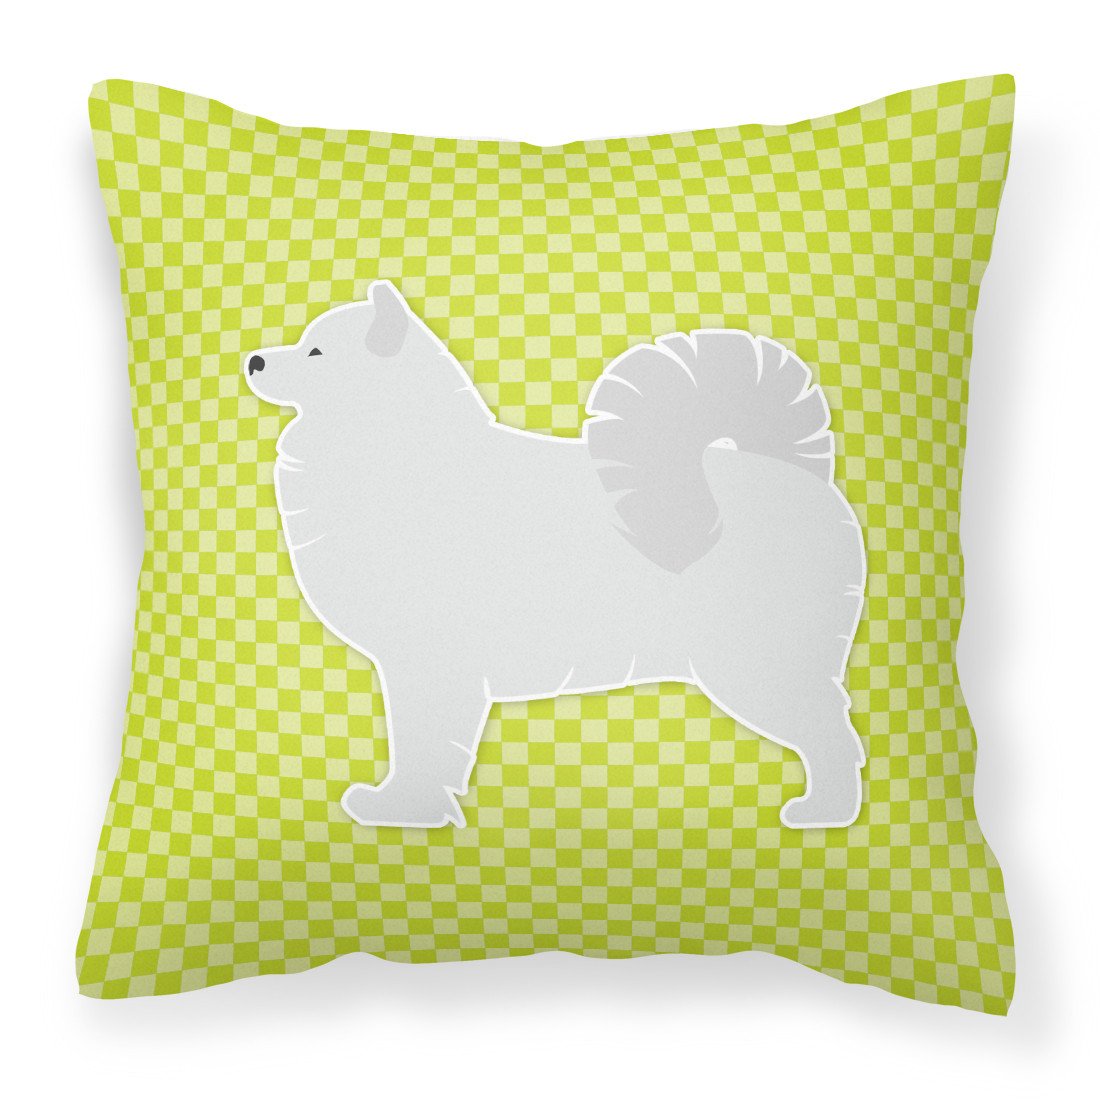 Samoyed Checkerboard Green Fabric Decorative Pillow BB3859PW1818 by Caroline's Treasures